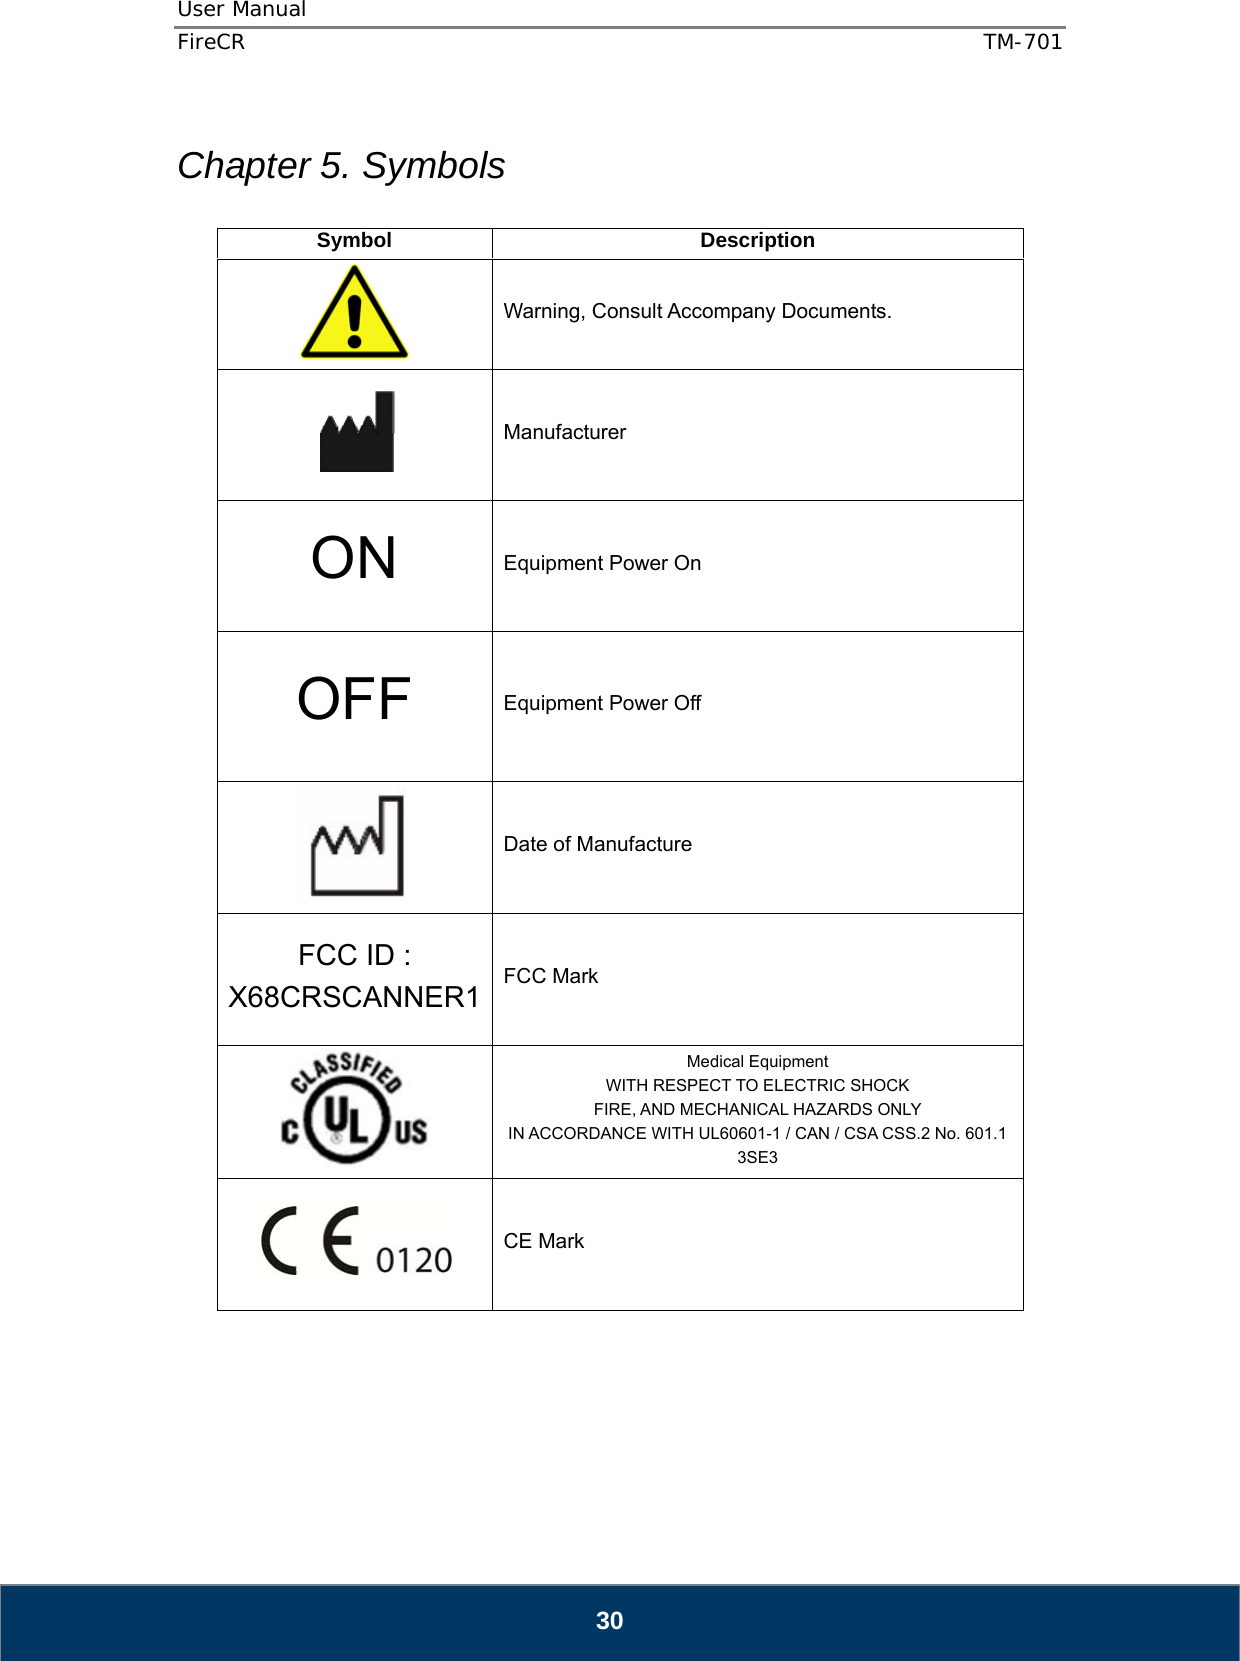 User Manual  FireCR  TM-701   30  Chapter 5. Symbols  Symbol Description  Warning, Consult Accompany Documents.  Manufacturer ON  Equipment Power On OFF  Equipment Power Off  Date of Manufacture FCC ID : X68CRSCANNER1  FCC Mark  Medical Equipment WITH RESPECT TO ELECTRIC SHOCK FIRE, AND MECHANICAL HAZARDS ONLY IN ACCORDANCE WITH UL60601-1 / CAN / CSA CSS.2 No. 601.1 3SE3  CE Mark      